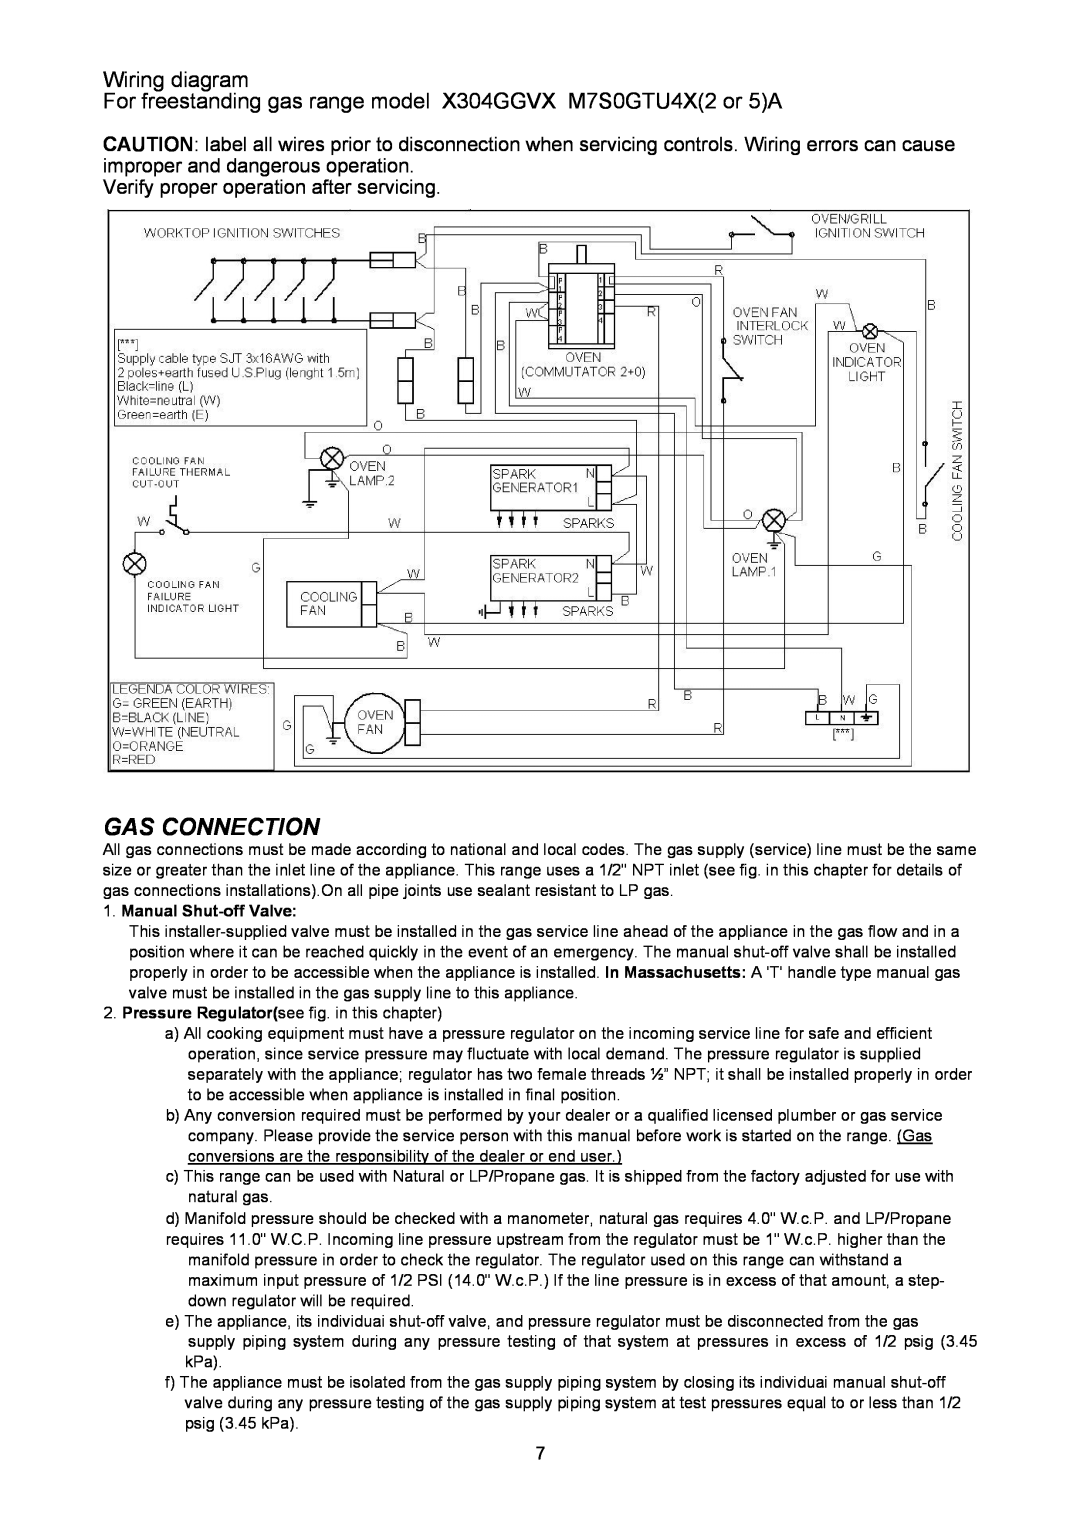 Bertazzoni X304GGVX, M7S0GTU4X(2 OR 5)A dimensions Gas Connection, Wiring diagram, Verify proper operation after servicing 